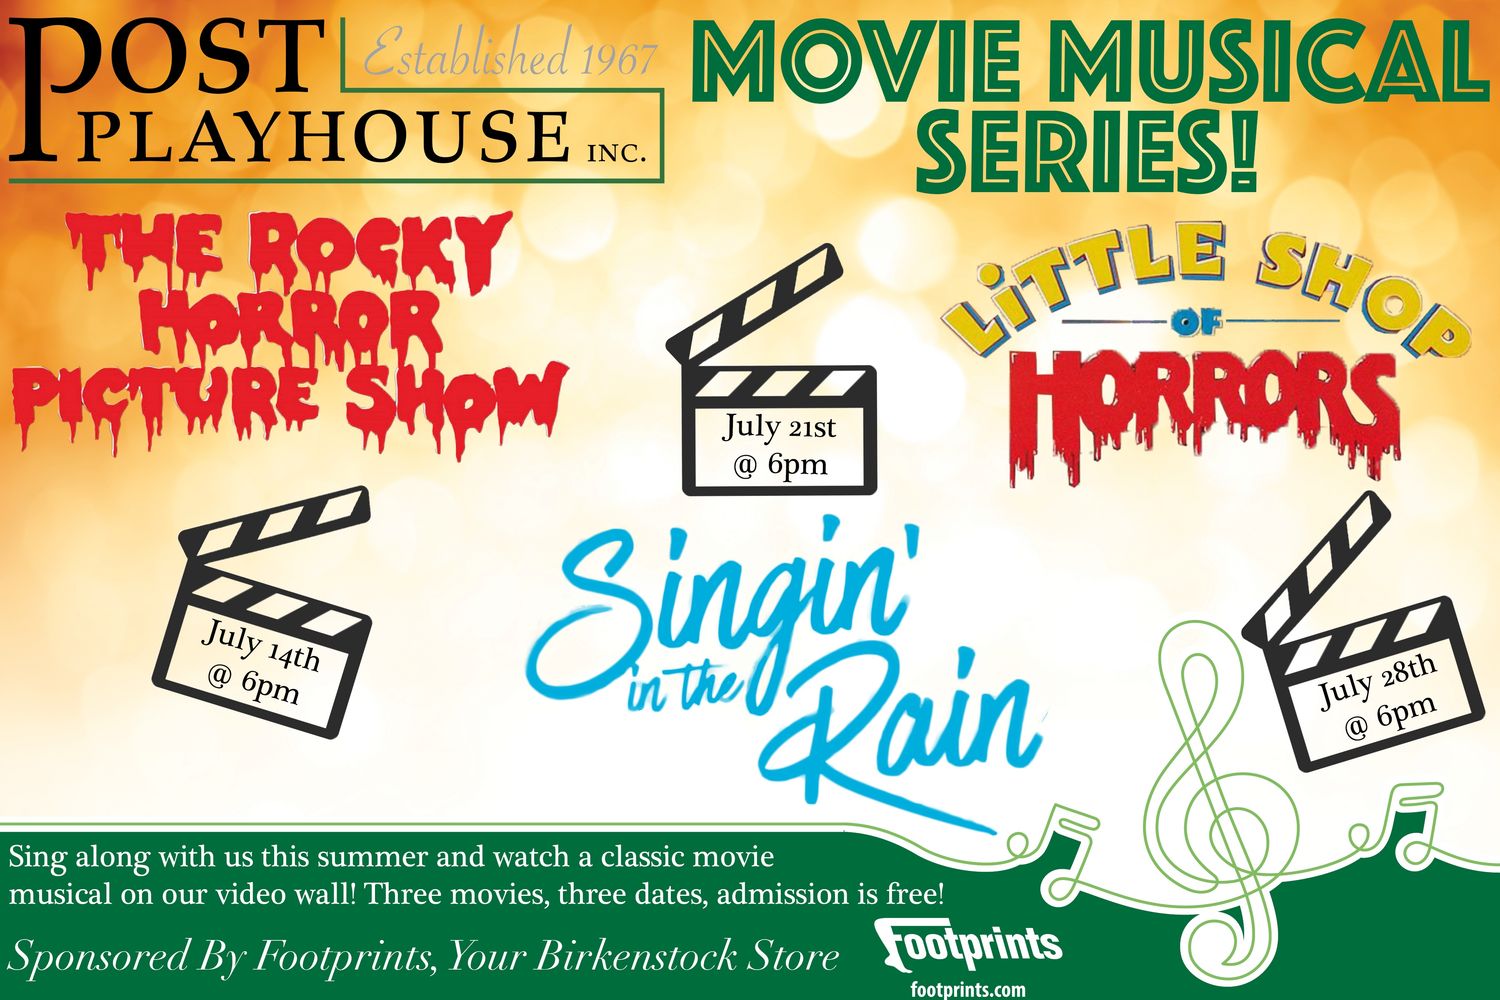 Show Logo for Movie Musical Series